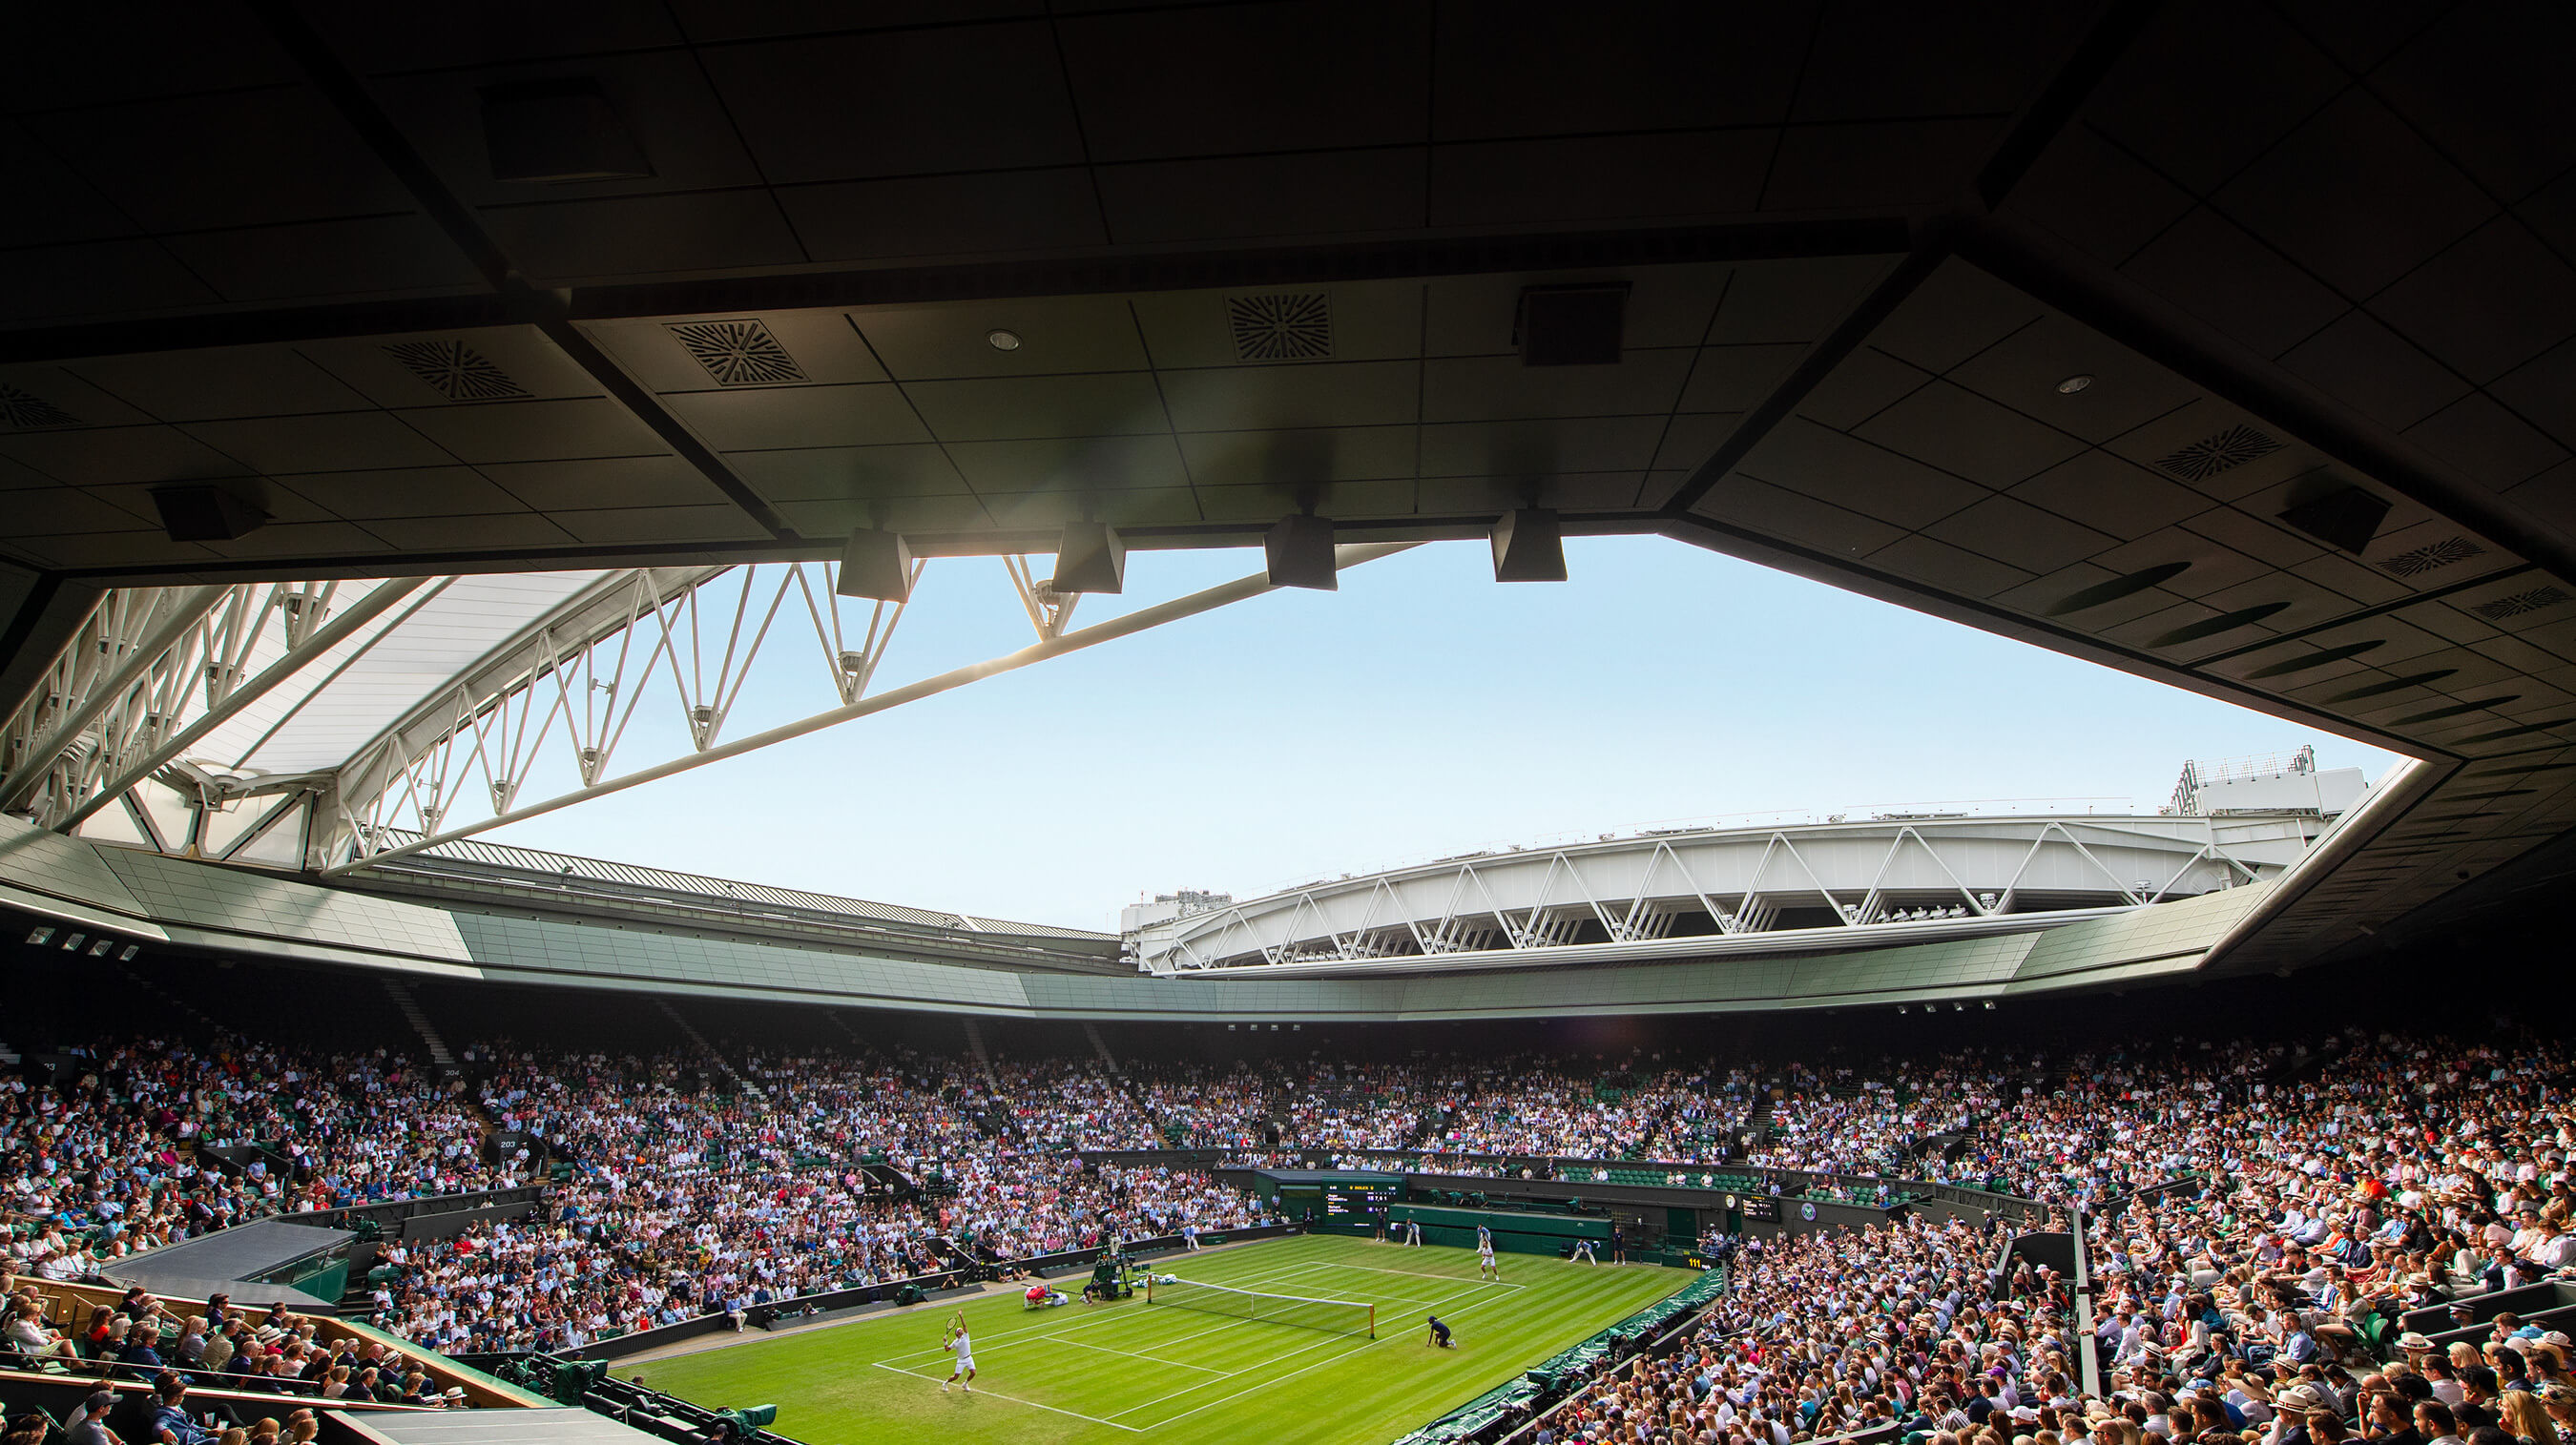 rolex-and-the-championships-wimbledon